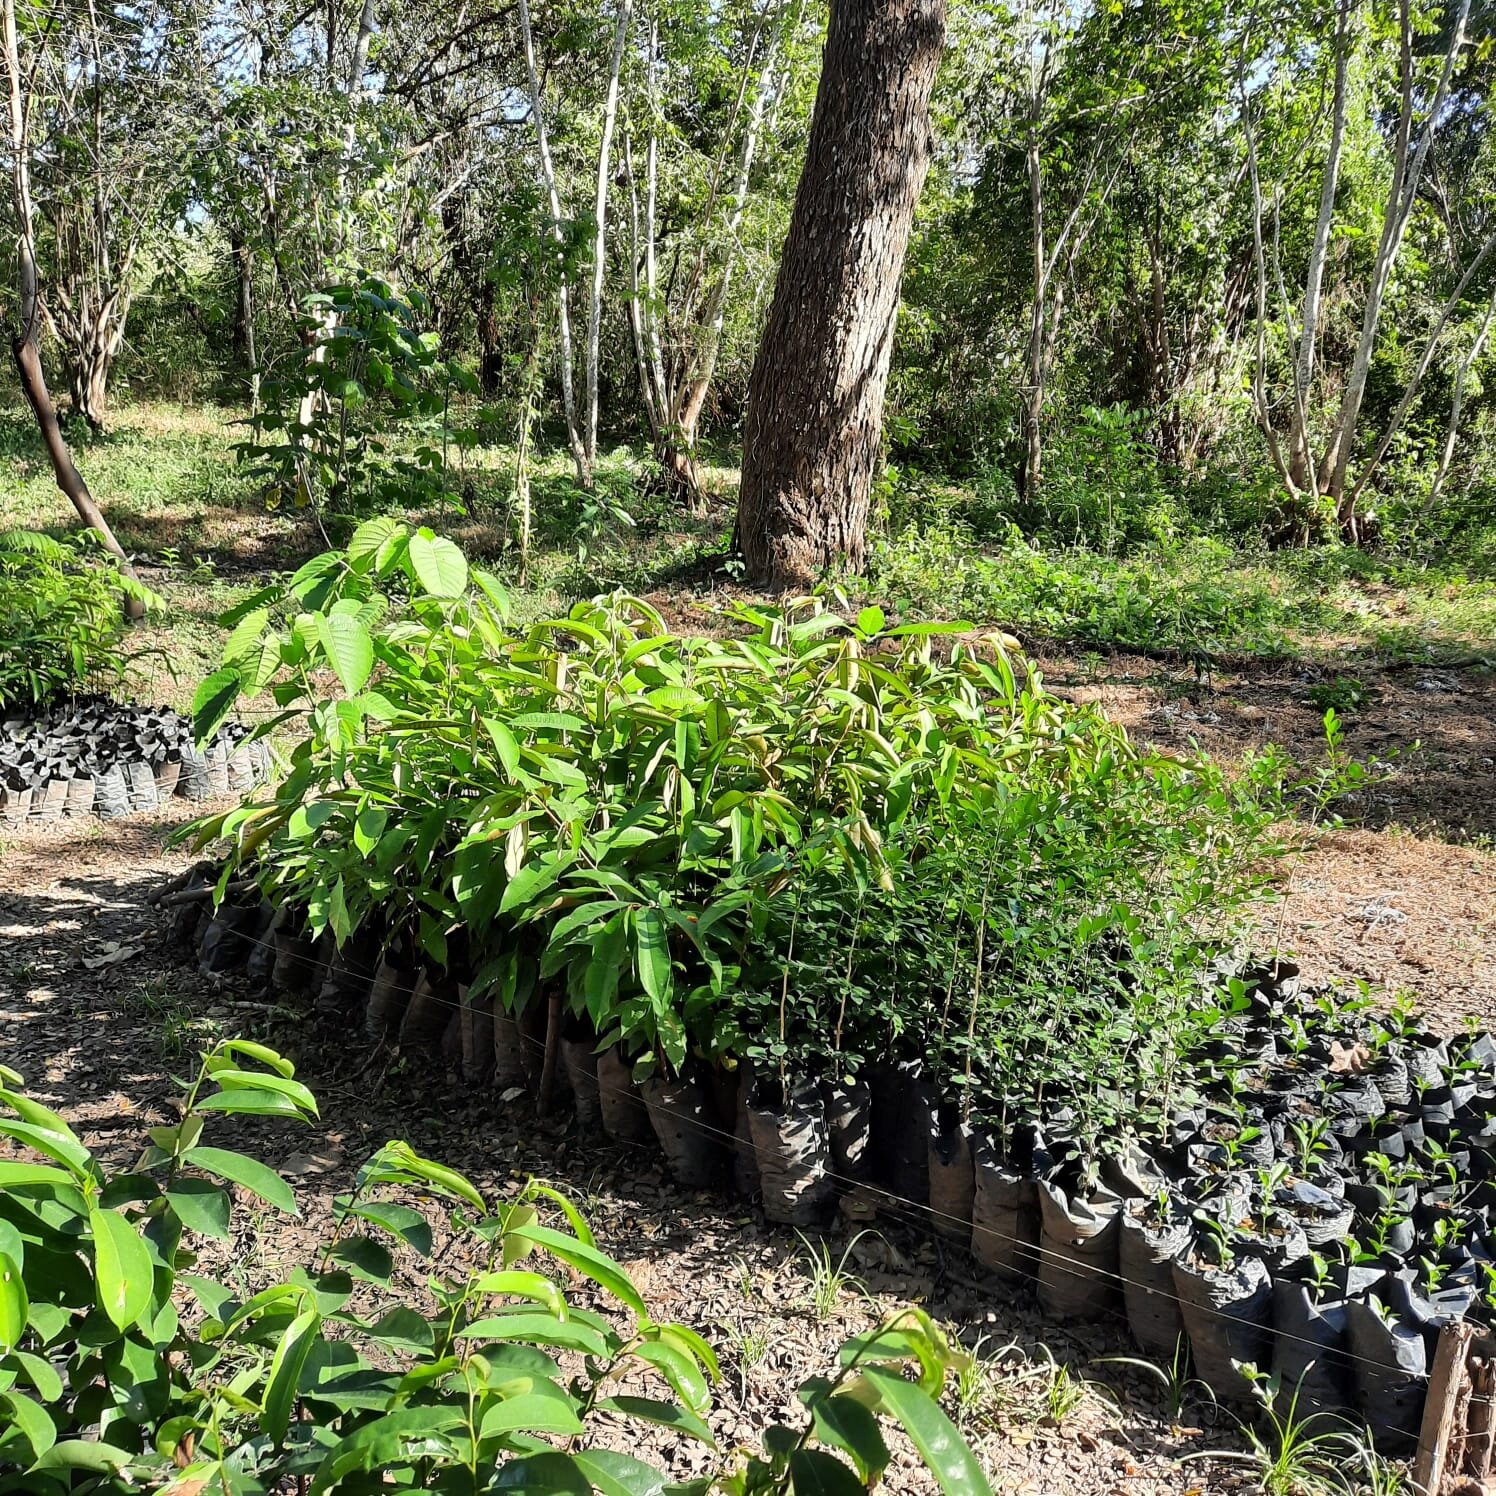 [EN] The UN Decade on Ecosystem Restoration have recently published a report on Why Native Forest Reforestation Matters. 

'To ensure forests sustainably and permanently capture carbon, planting initiatives need to shift toward native forest restorat